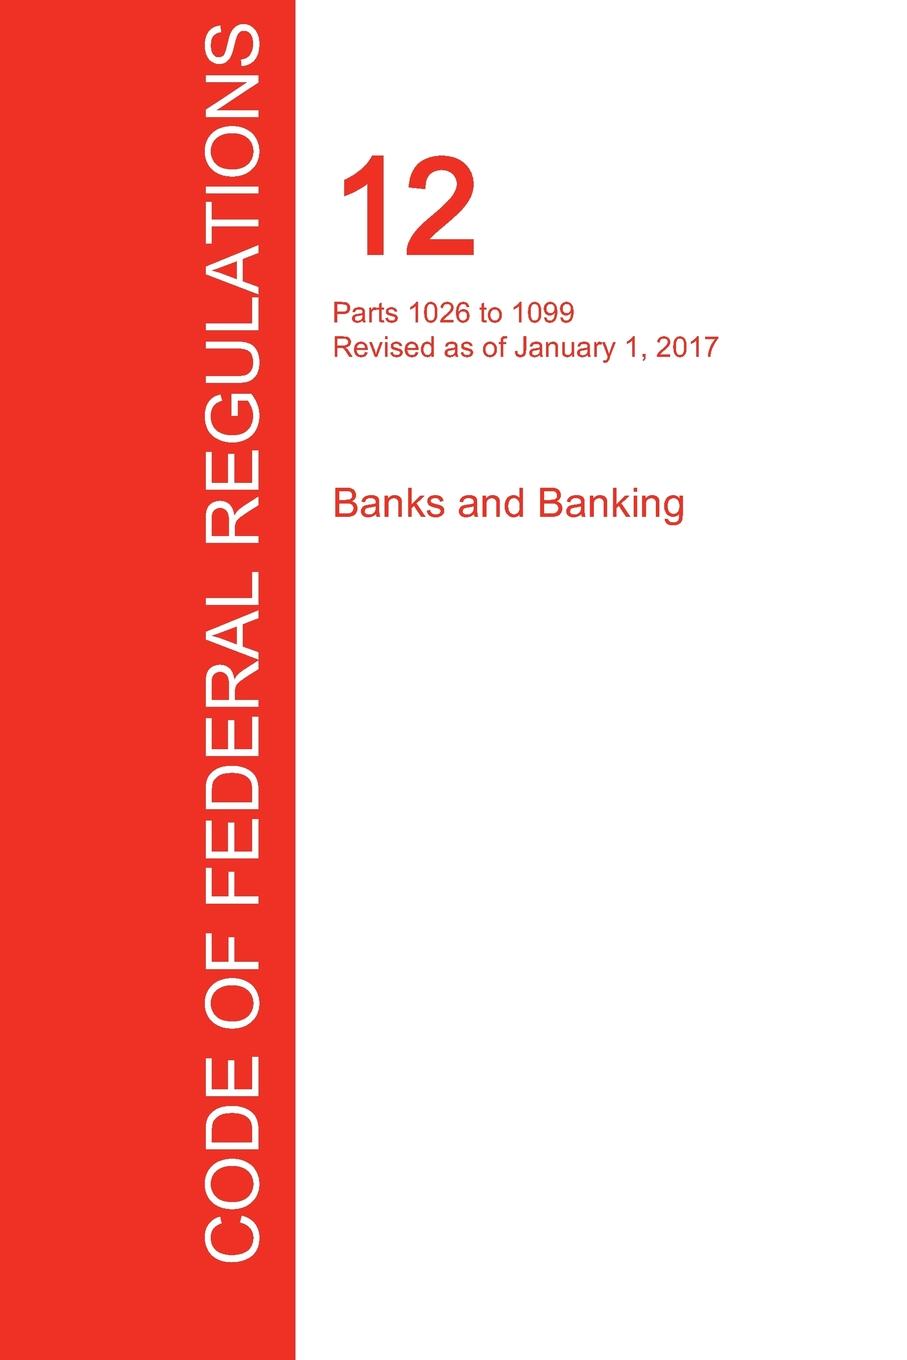 фото CFR 12, Parts 1026 to 1099, Banks and Banking, January 01, 2017 (Volume 9 of 10)